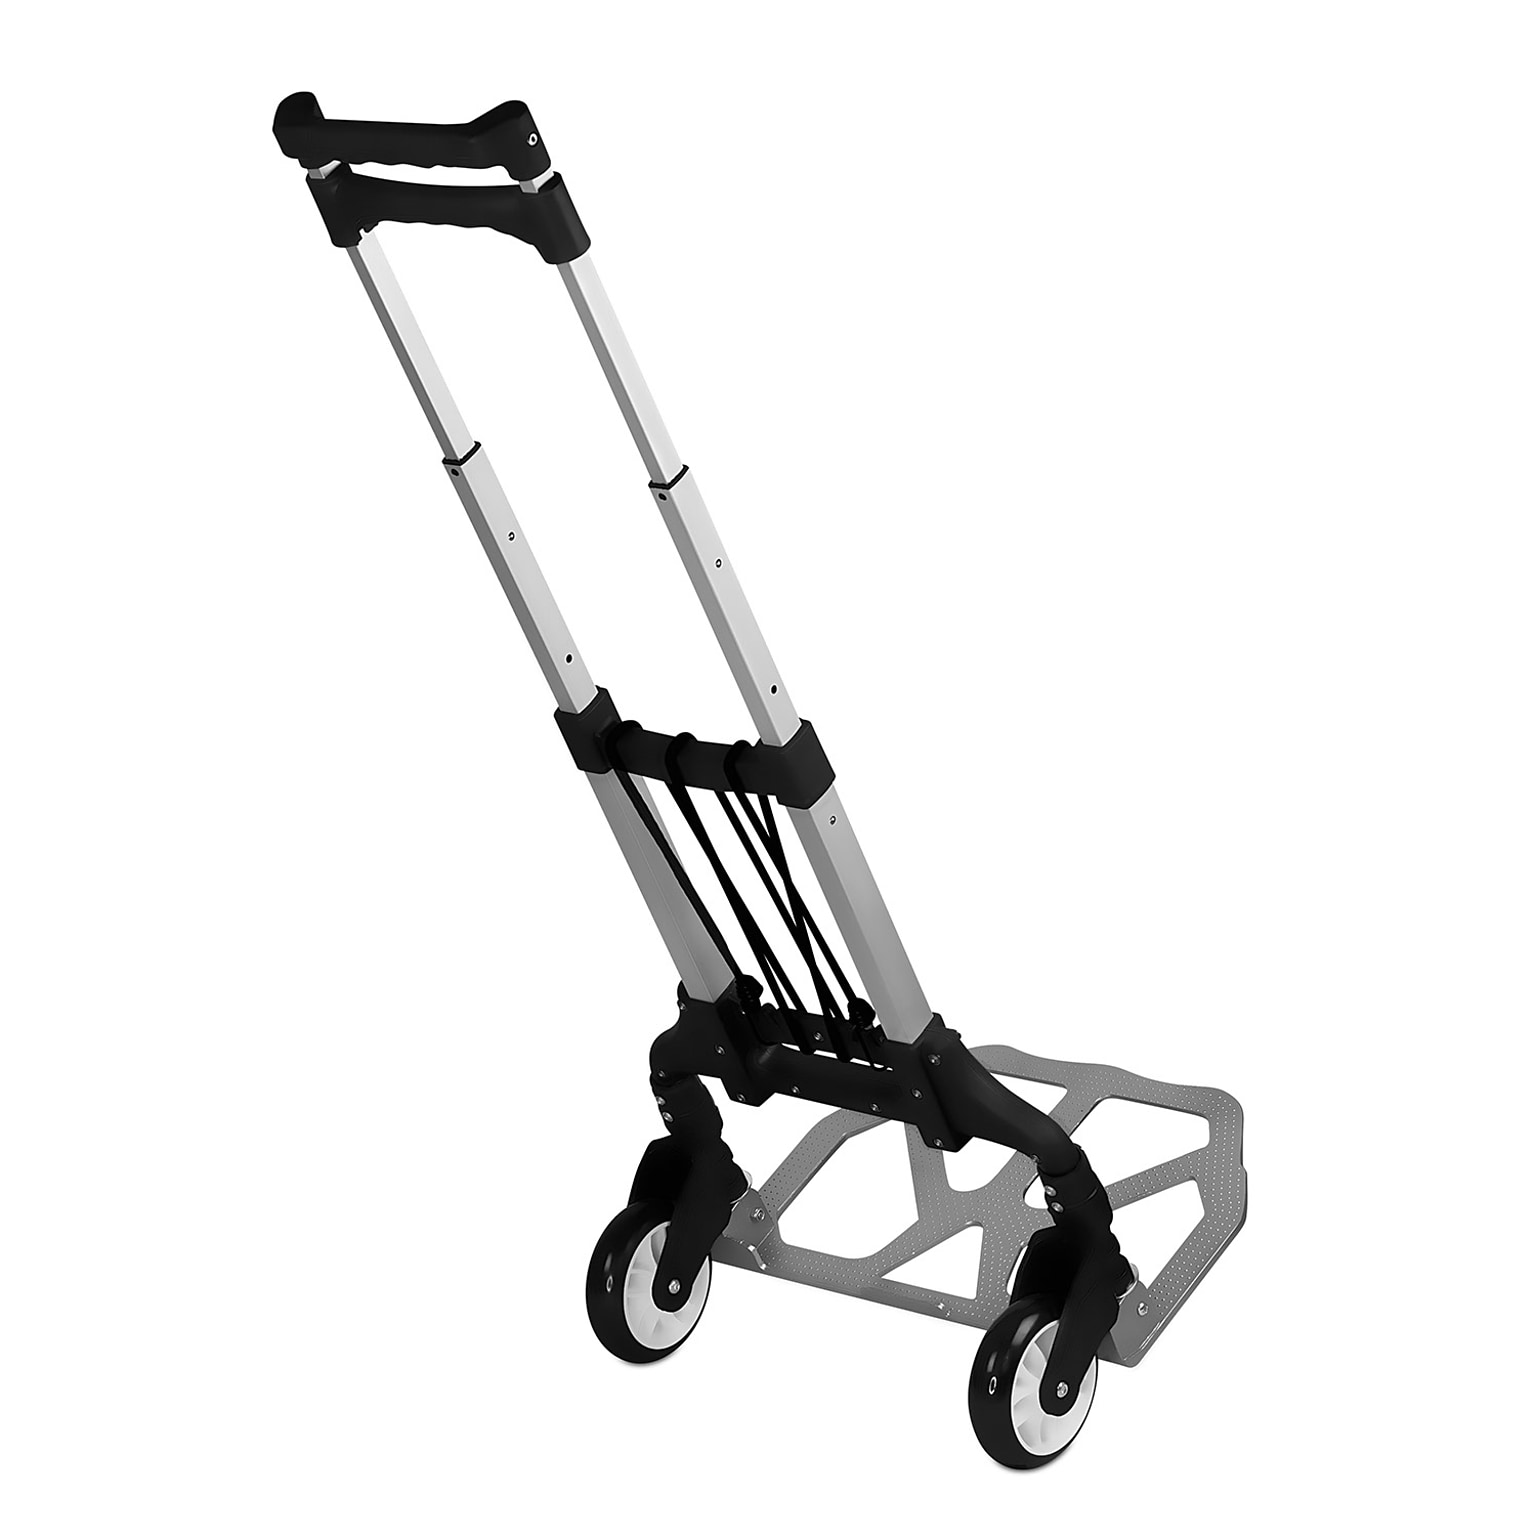 Mount-It! Folding Hand Truck and Dolly, 165 lbs., Silver/Black (MI-901)